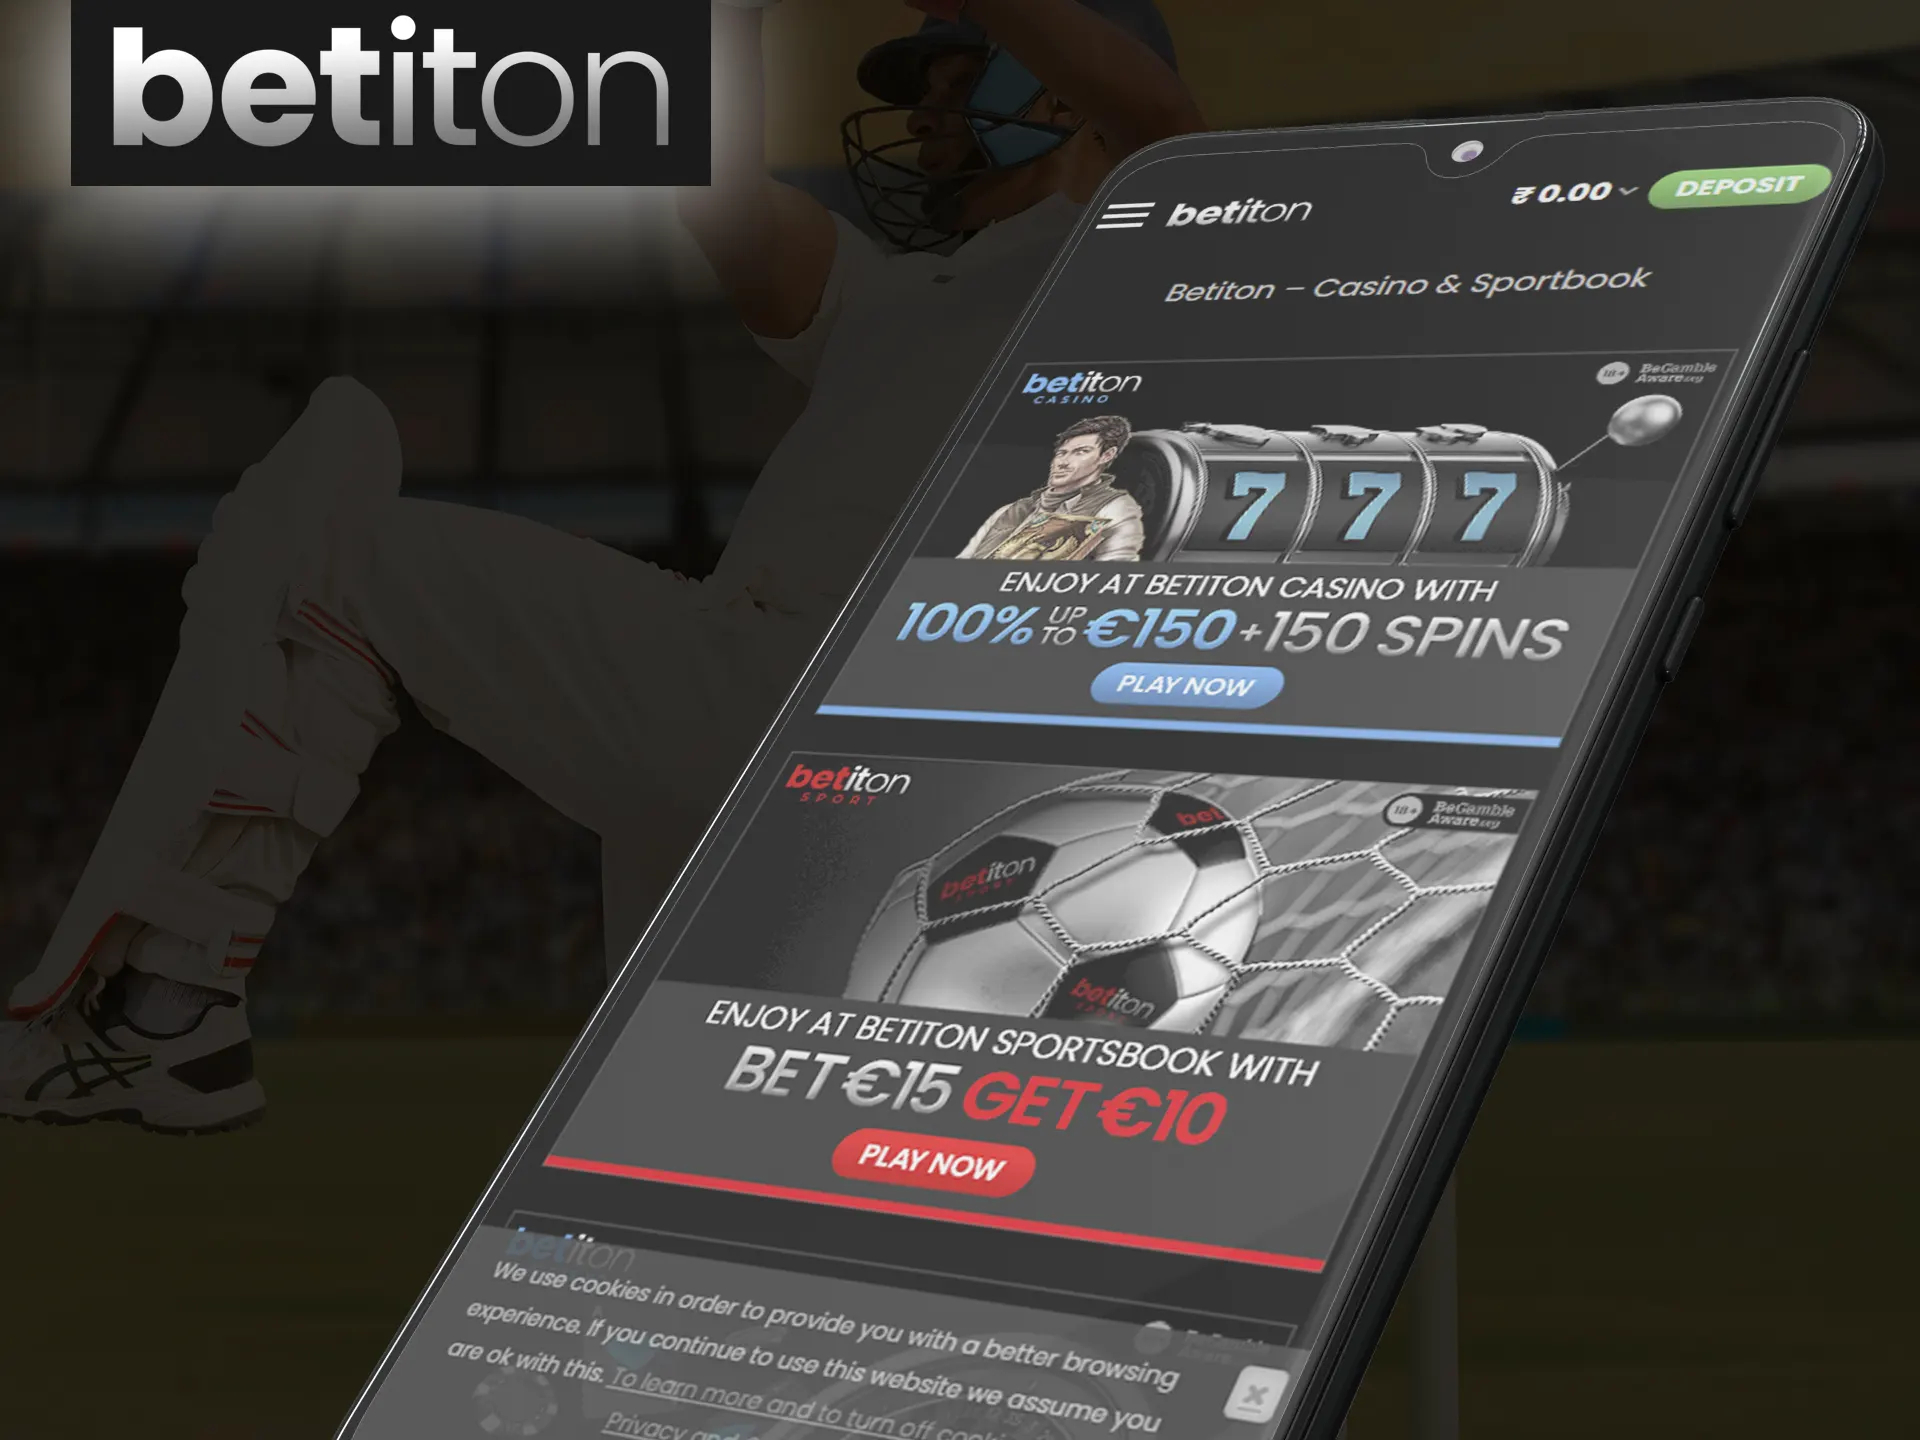 Visit Betiton mobile website if you have problems with the installation of the app.